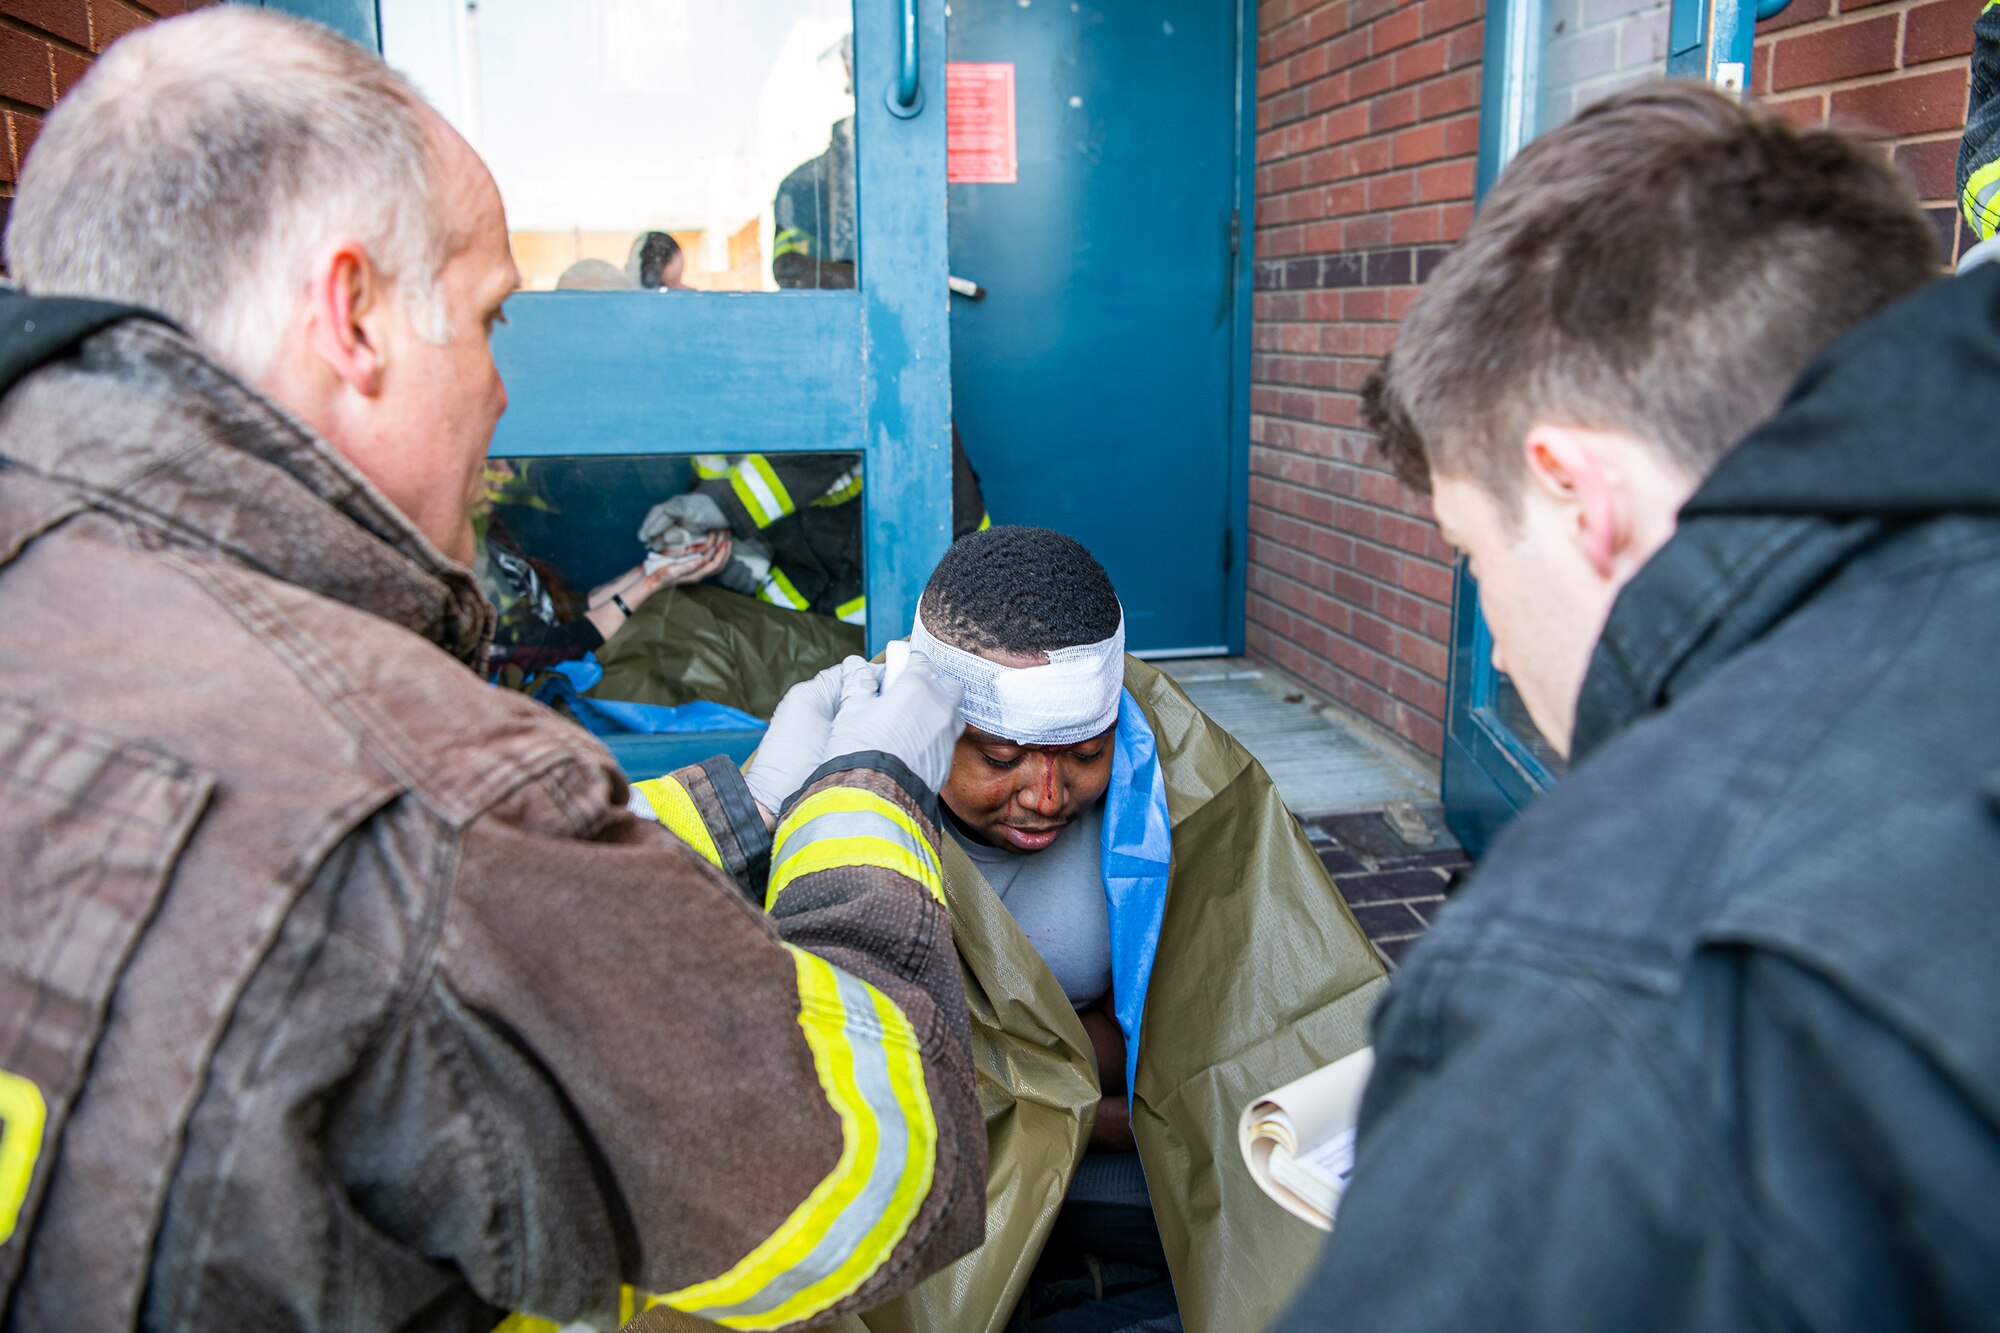 Firefighters from the 423d Civil Engineer Squadron, tend to a simulated victim during a readiness exercise, at RAF Molesworth, England, Feb. 11, 2020. The exercise tested the wing’s preparedness and response capabilities to an emergency situation. (U.S. Air Force photo by Senior Airman Eugene Oliver)